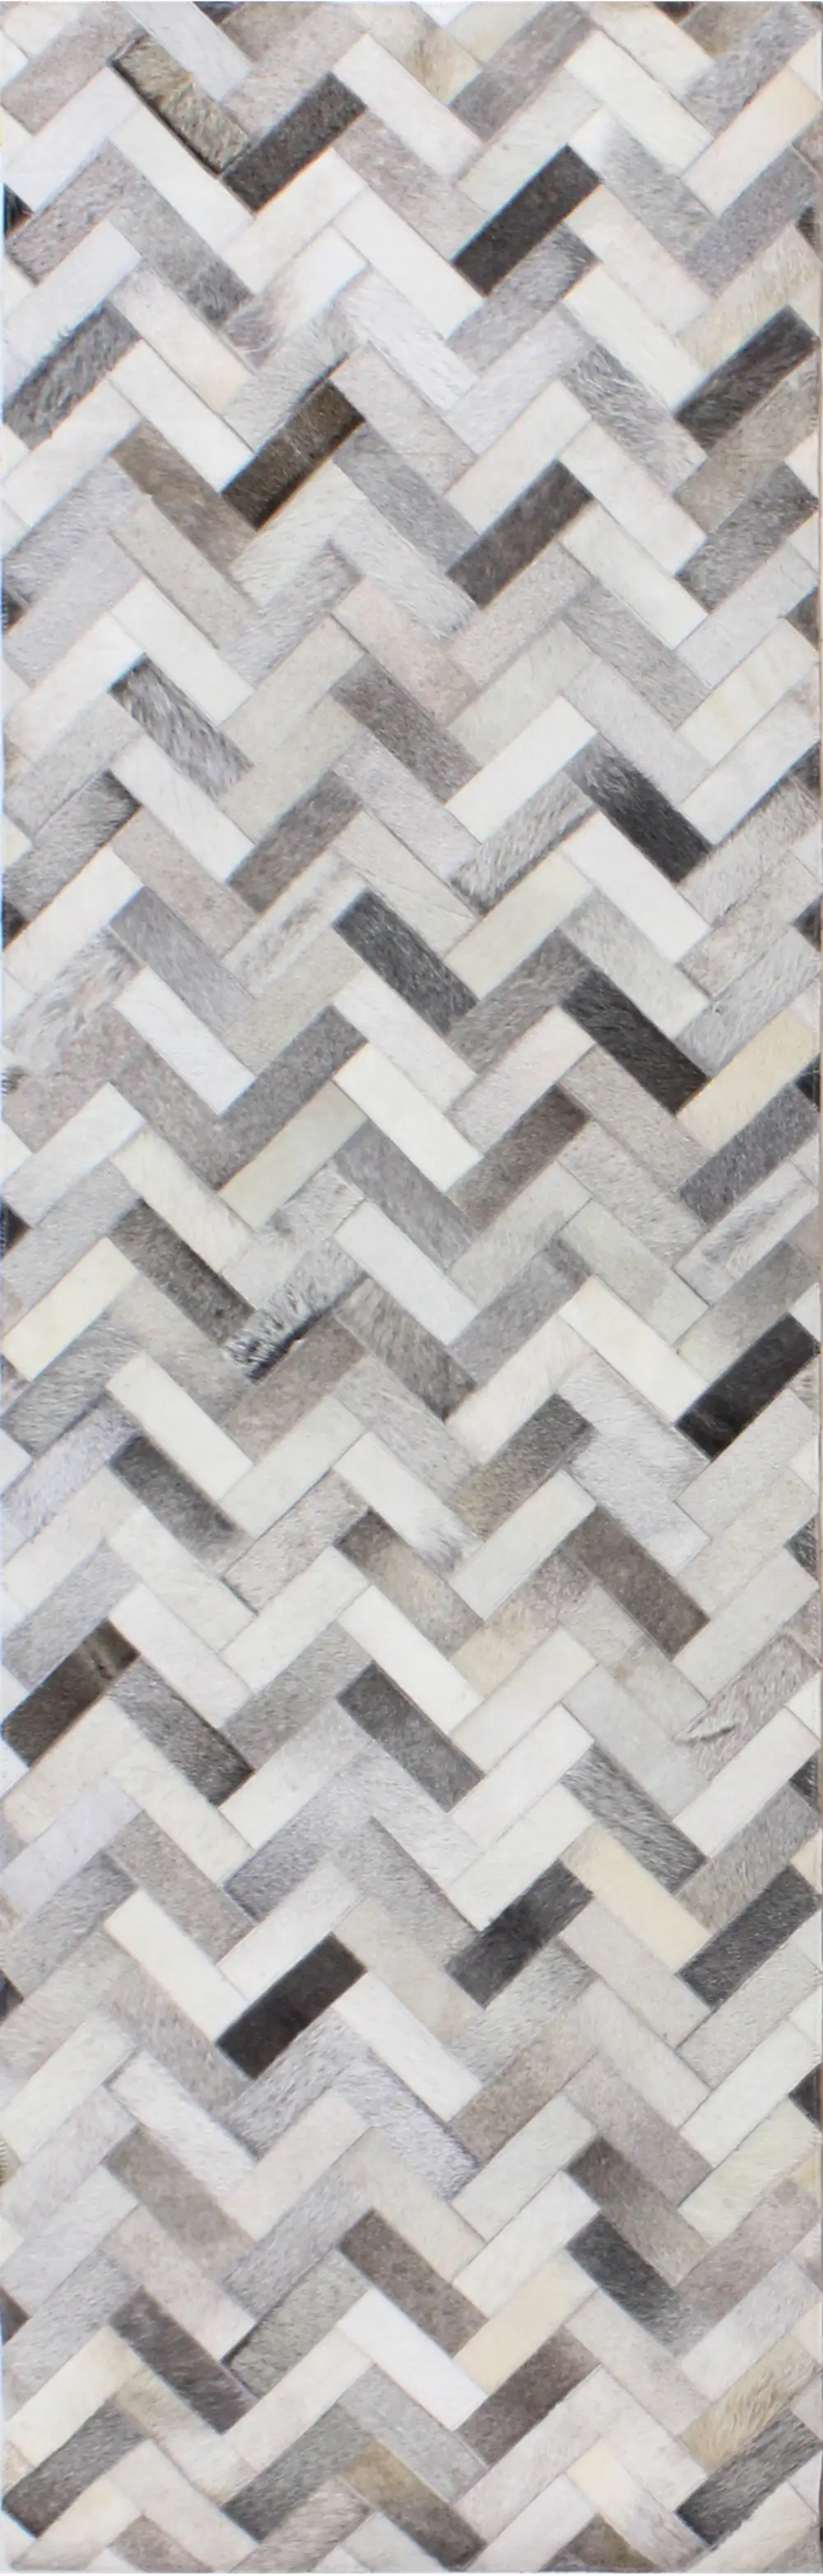 H112-ASH-2.6X8-H12 Contemporary Quentin Ash Gray Leather 8 Foot Runner Rug - Santa Fe-1